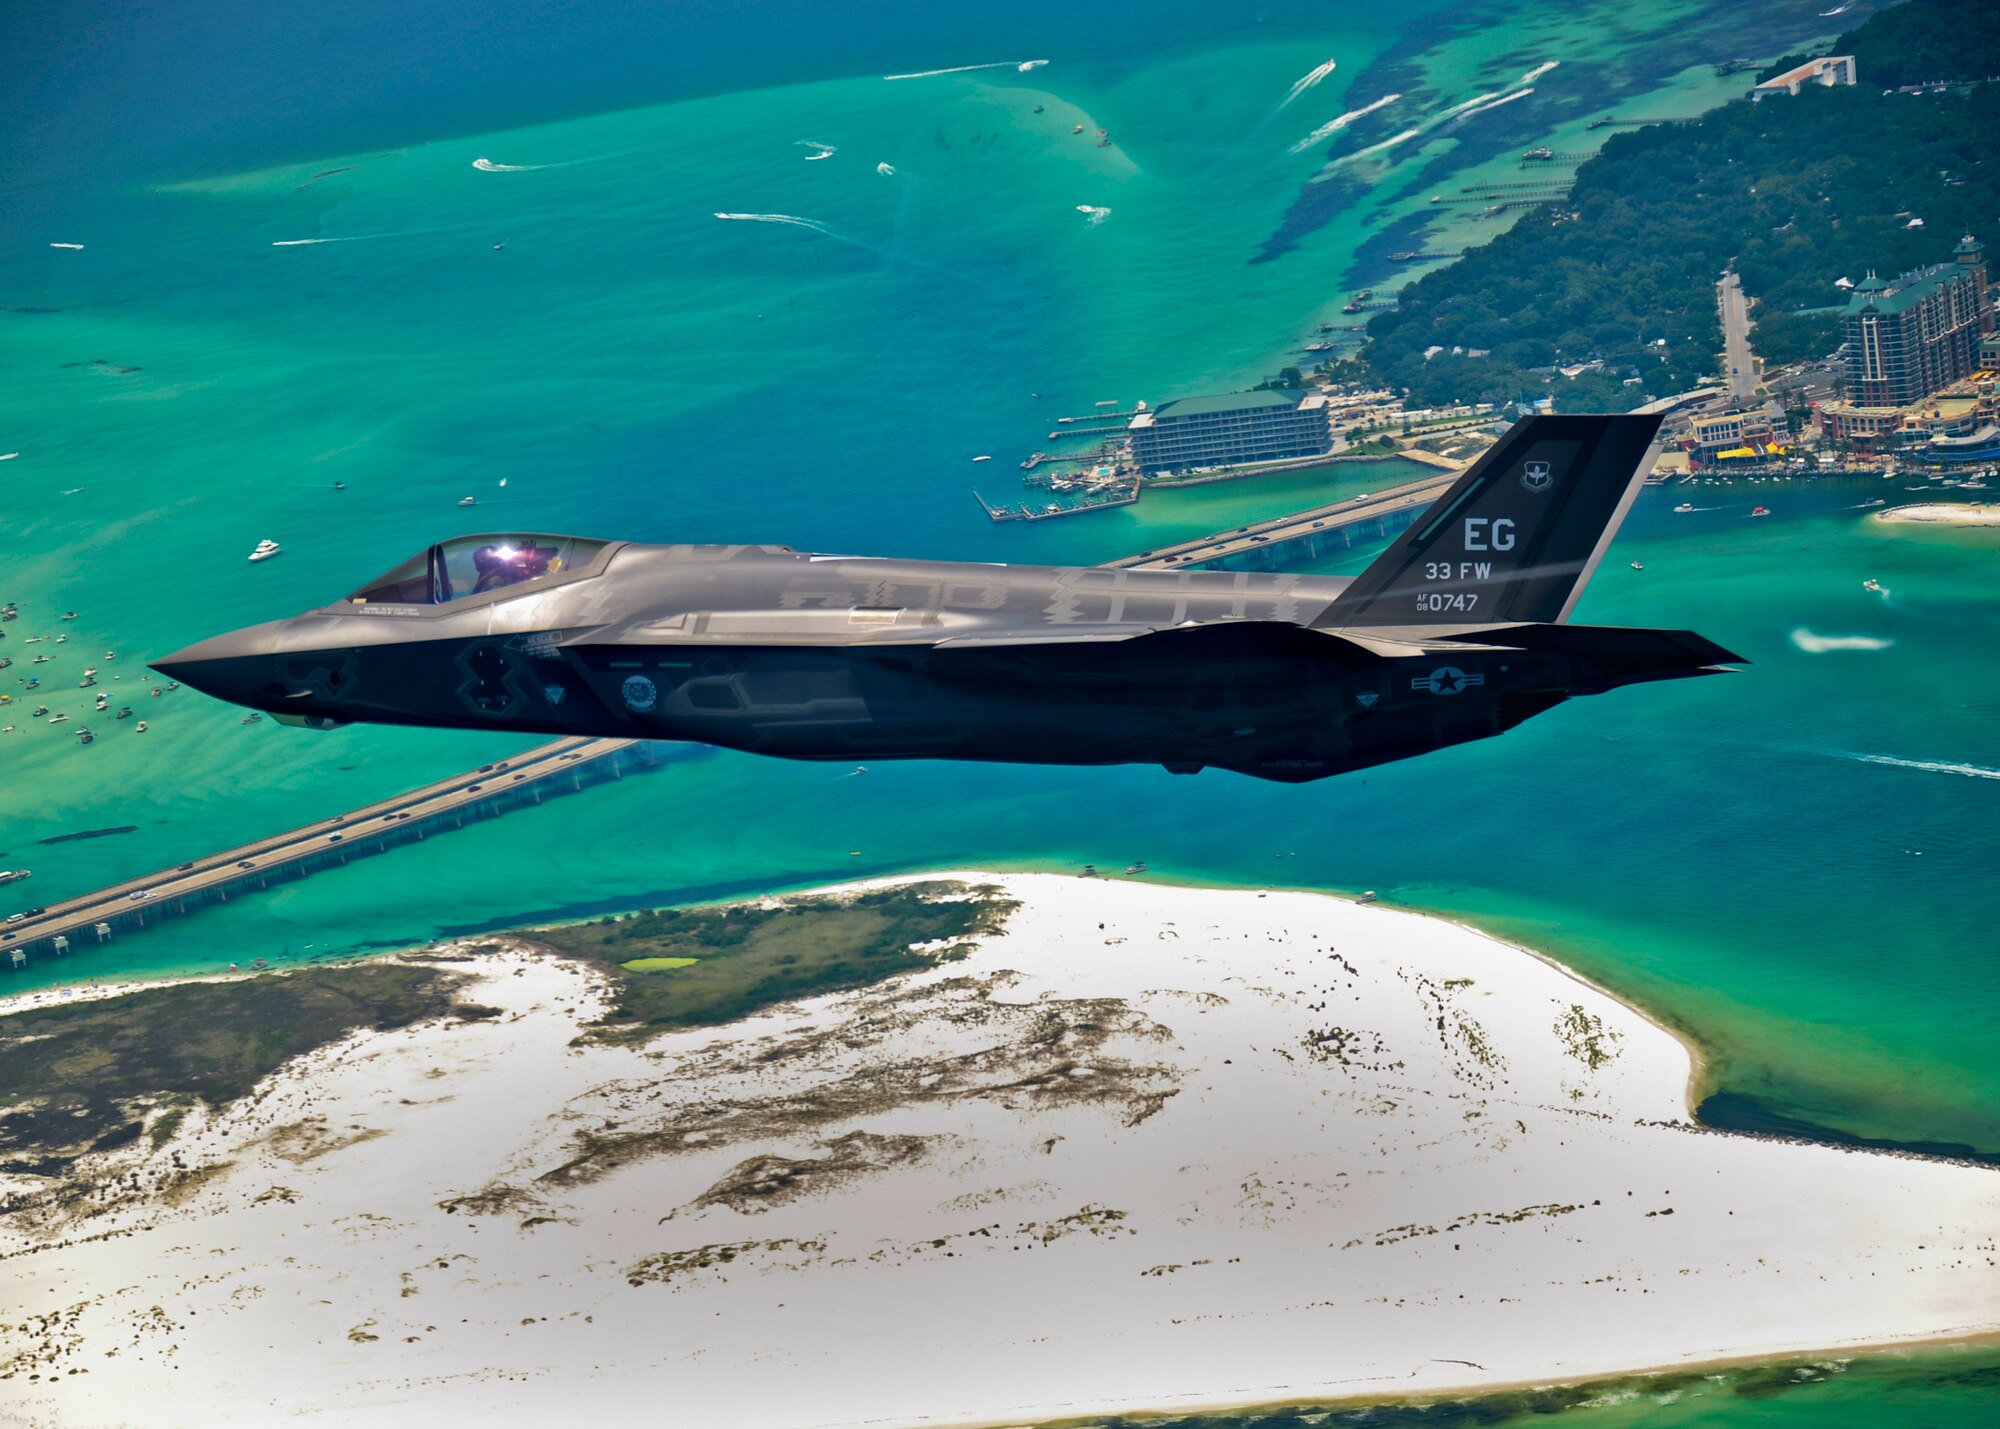 DOD’s first F-35 Lightning II joint strike fighter soars over Destin, Fla., before landing at its new home at Eglin Air Force Base, July 14.  Its pilot, Lt. Col. Eric Smith, of the 58th Fighter Squadron, is the first Air Force qualified JSF pilot.  (U.S. Air Force photo/Staff Sgt. Joely Santiago)